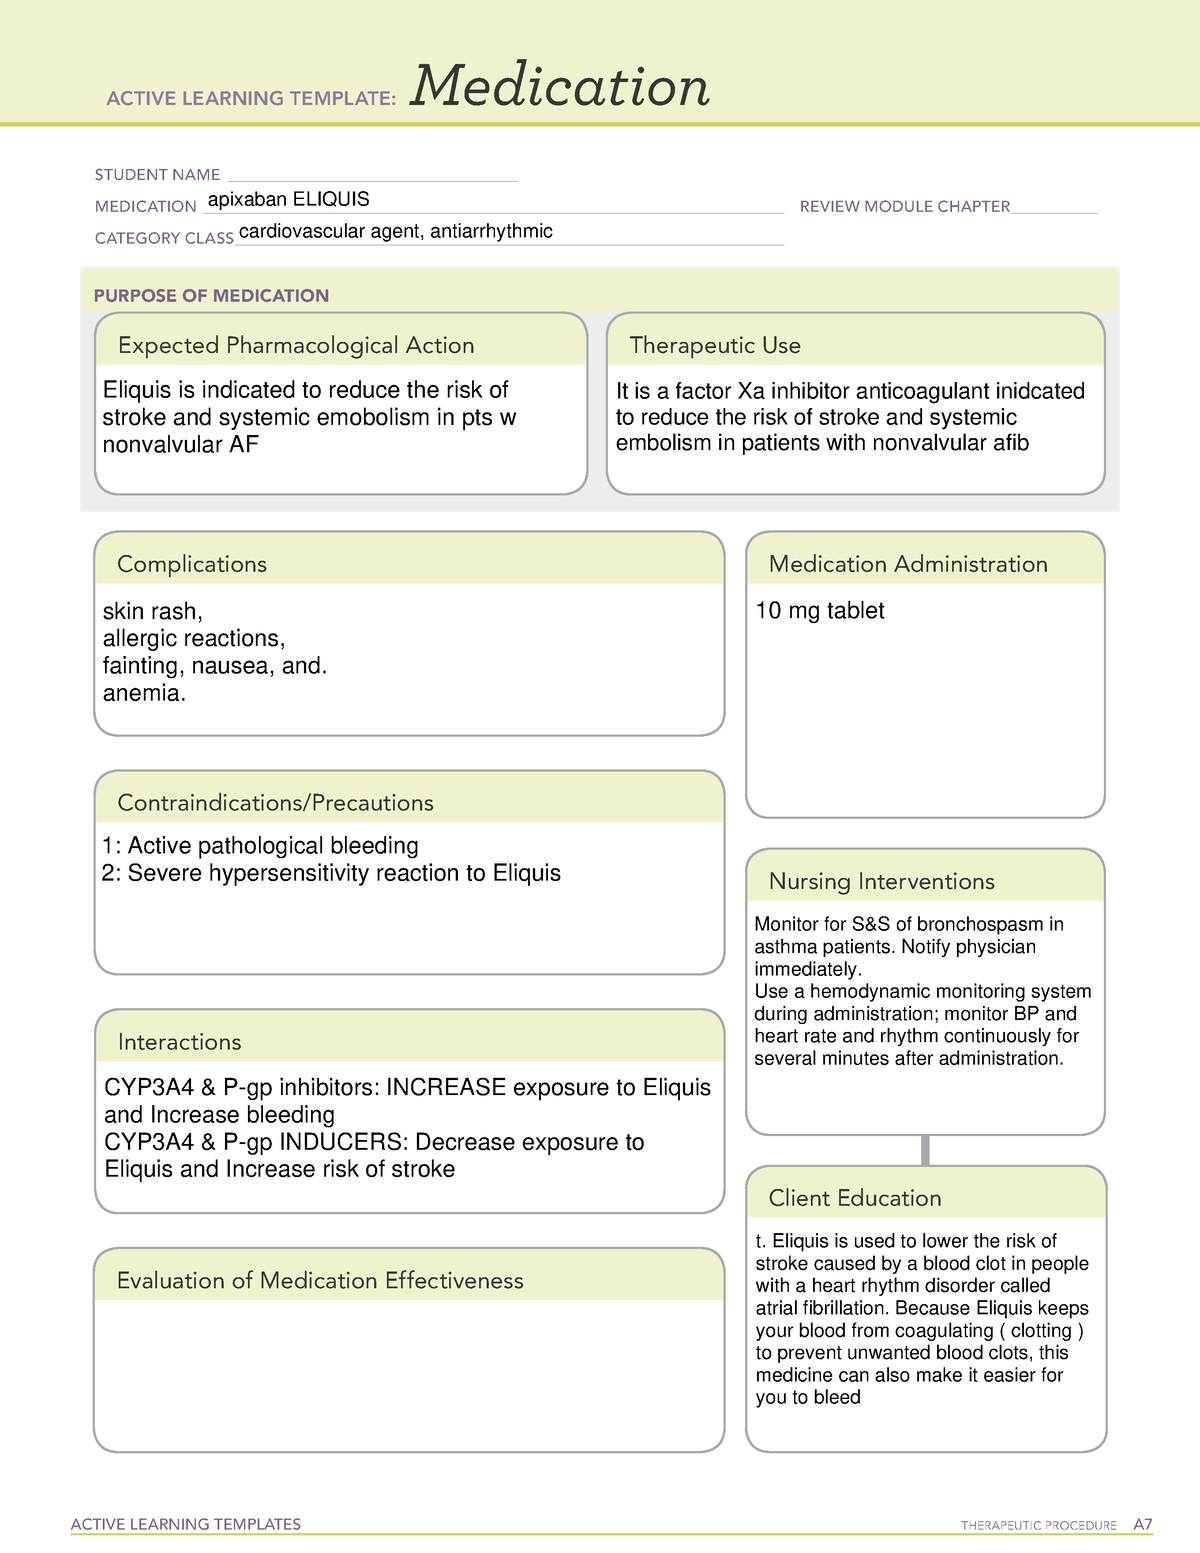 ATI medication template for med list - ACTIVE LEARNING TEMPLATES ...